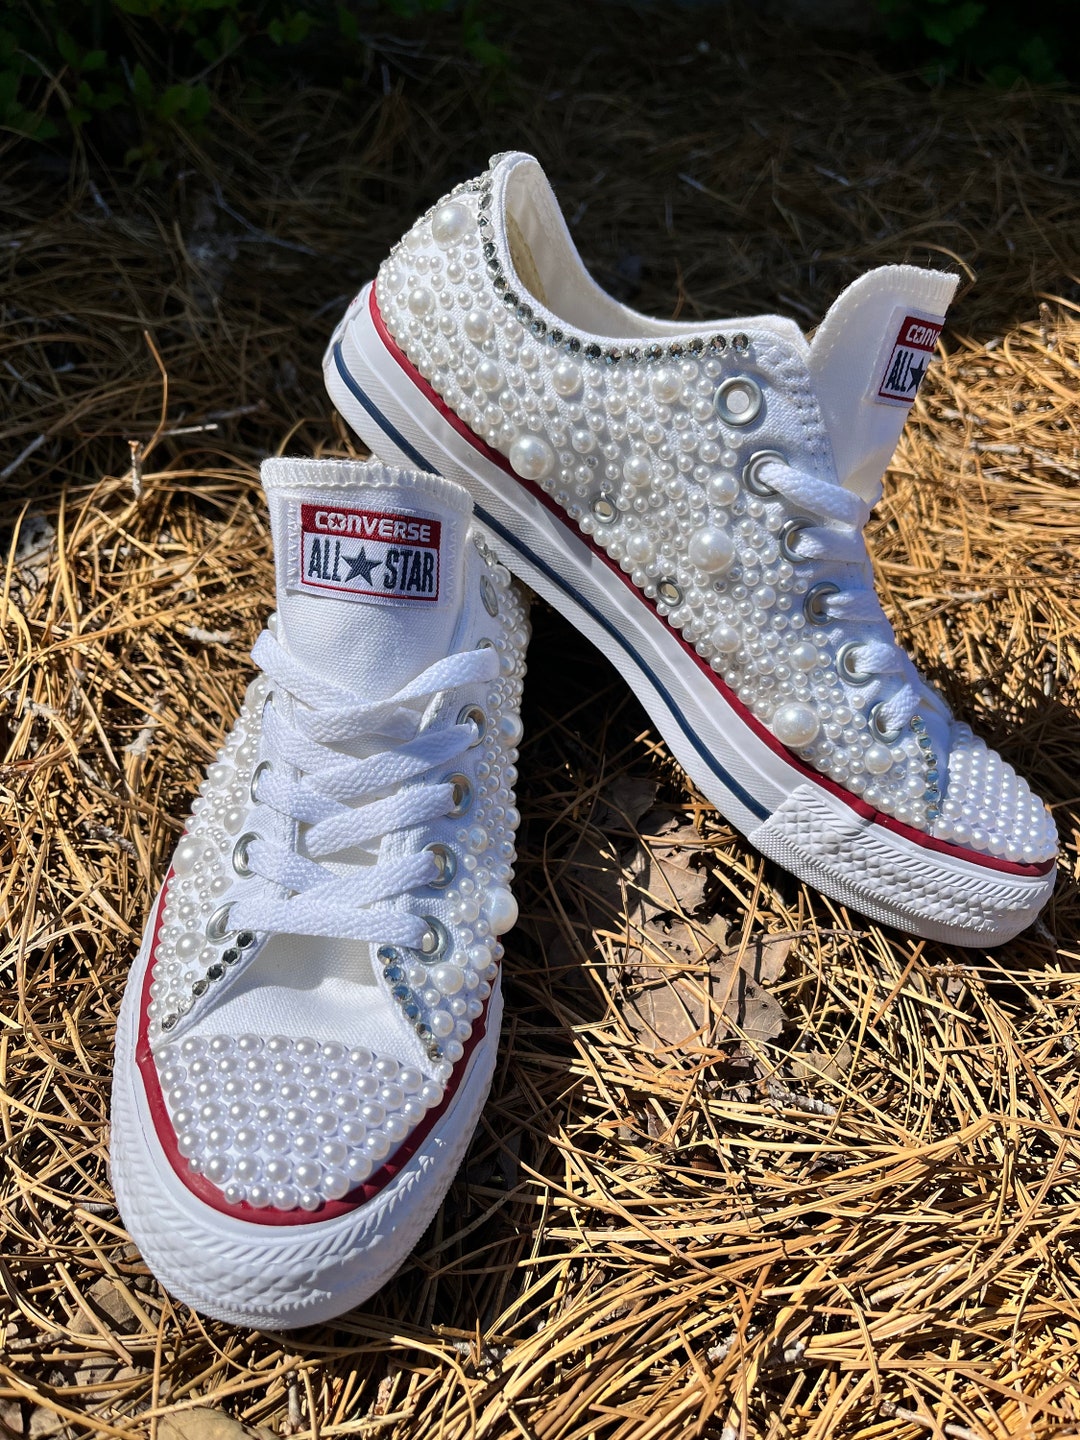 Pearl embellished custom Converse Chuck Taylor high tops tennis shoes